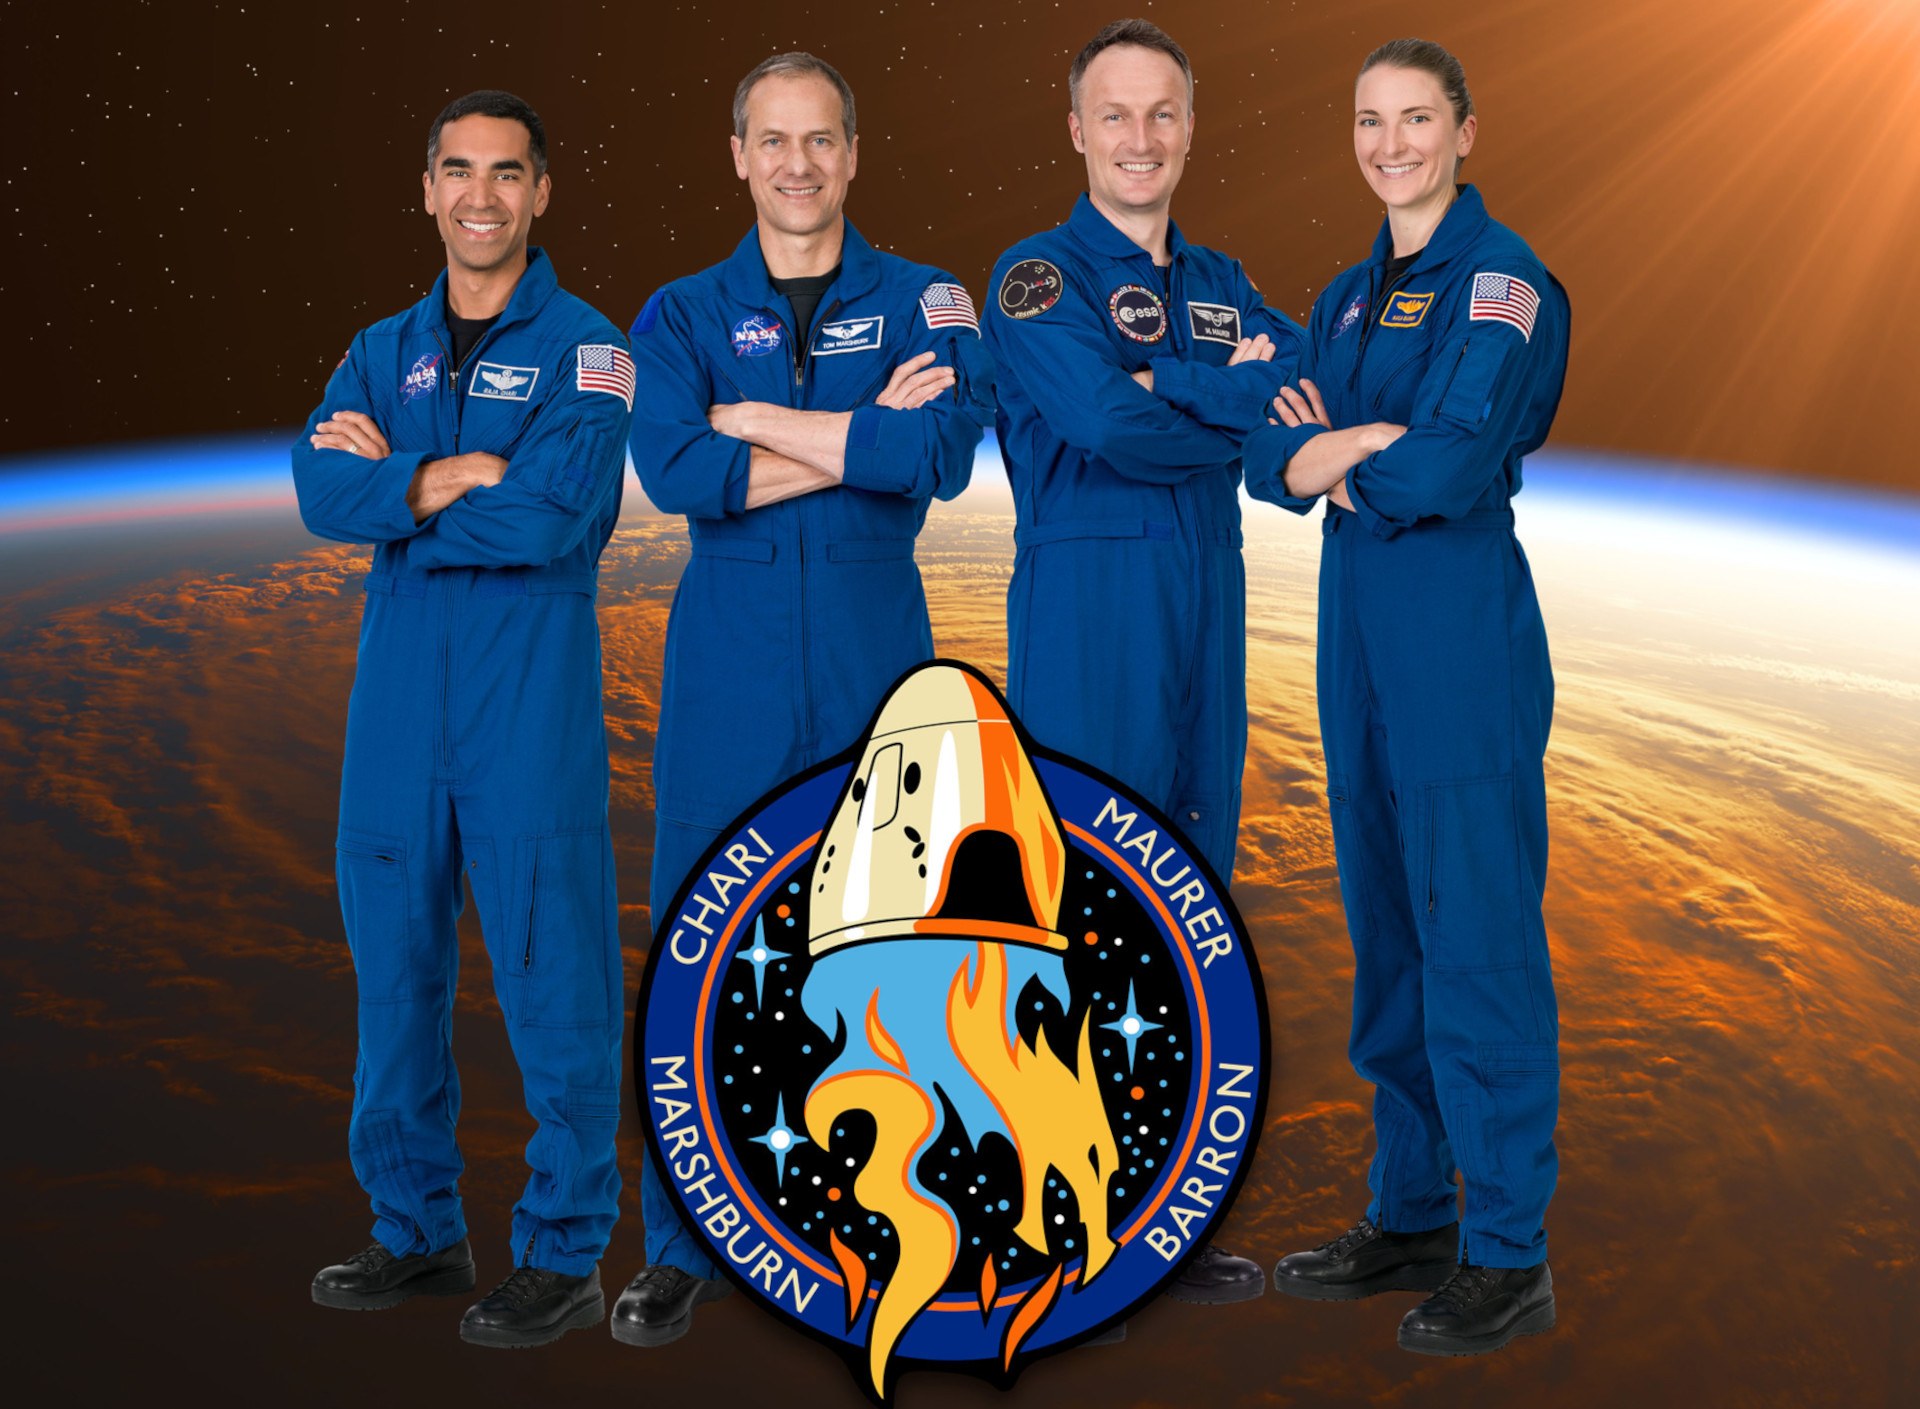 Official portrait of the SpaceX Crew-3